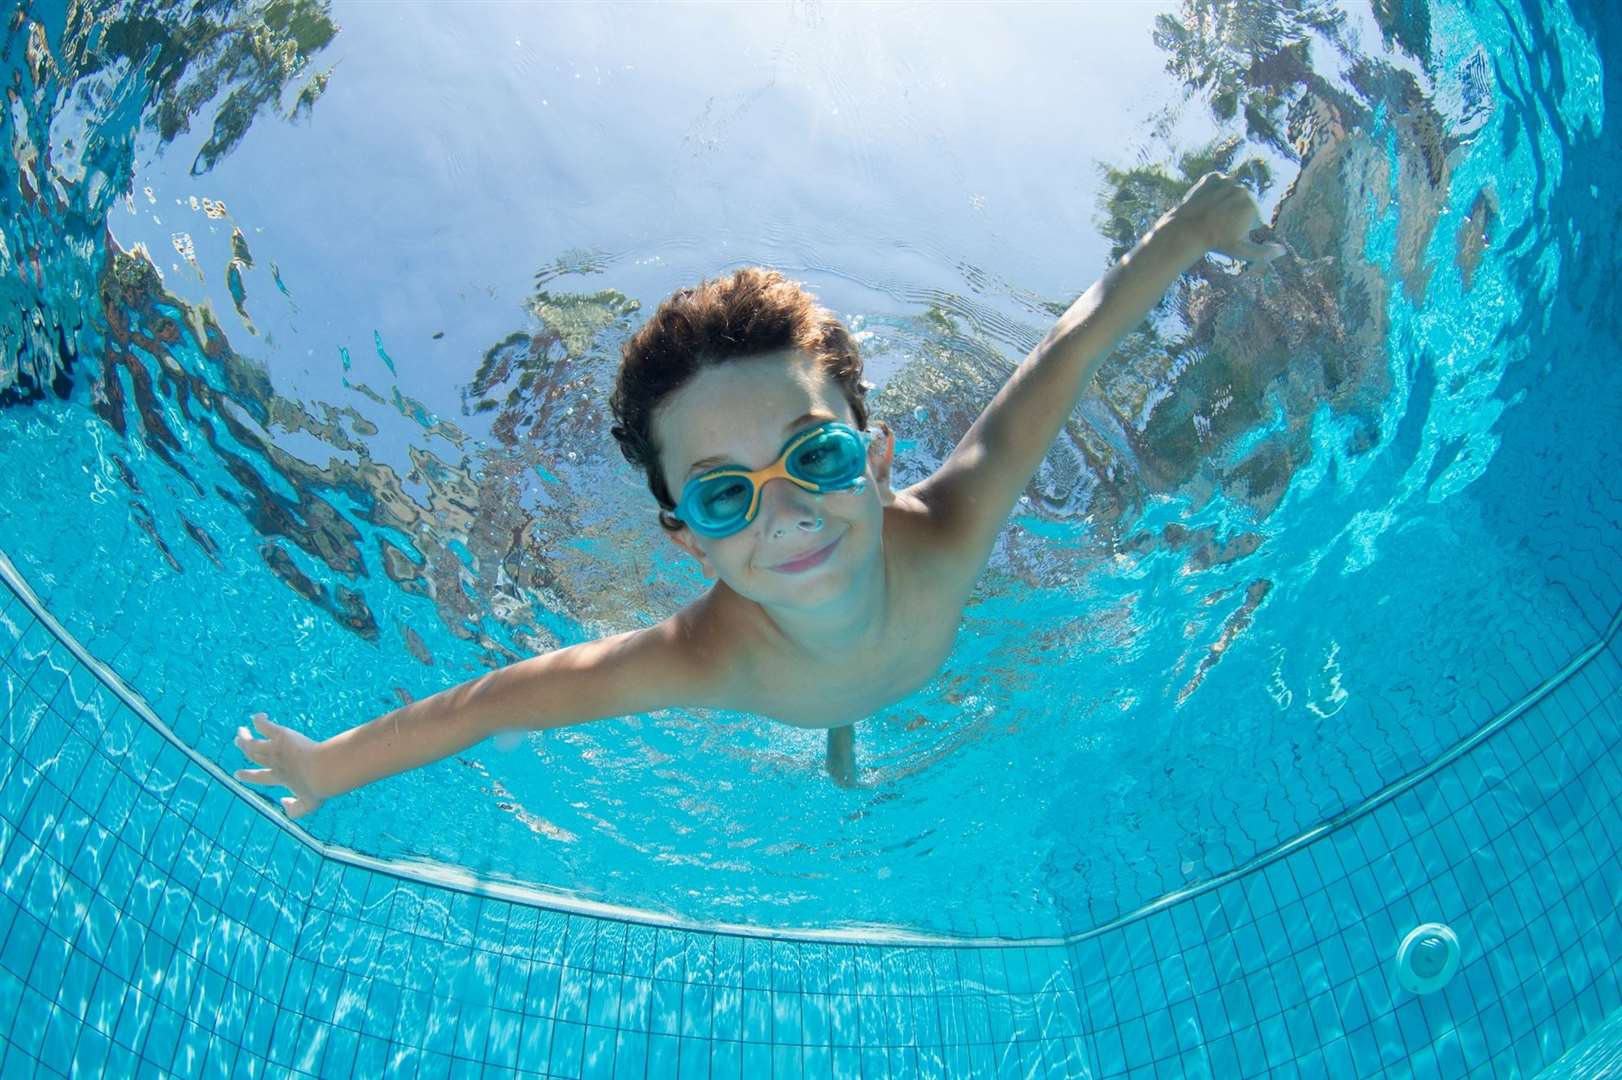 If only our seas were as clear as this kid’s swimming pool